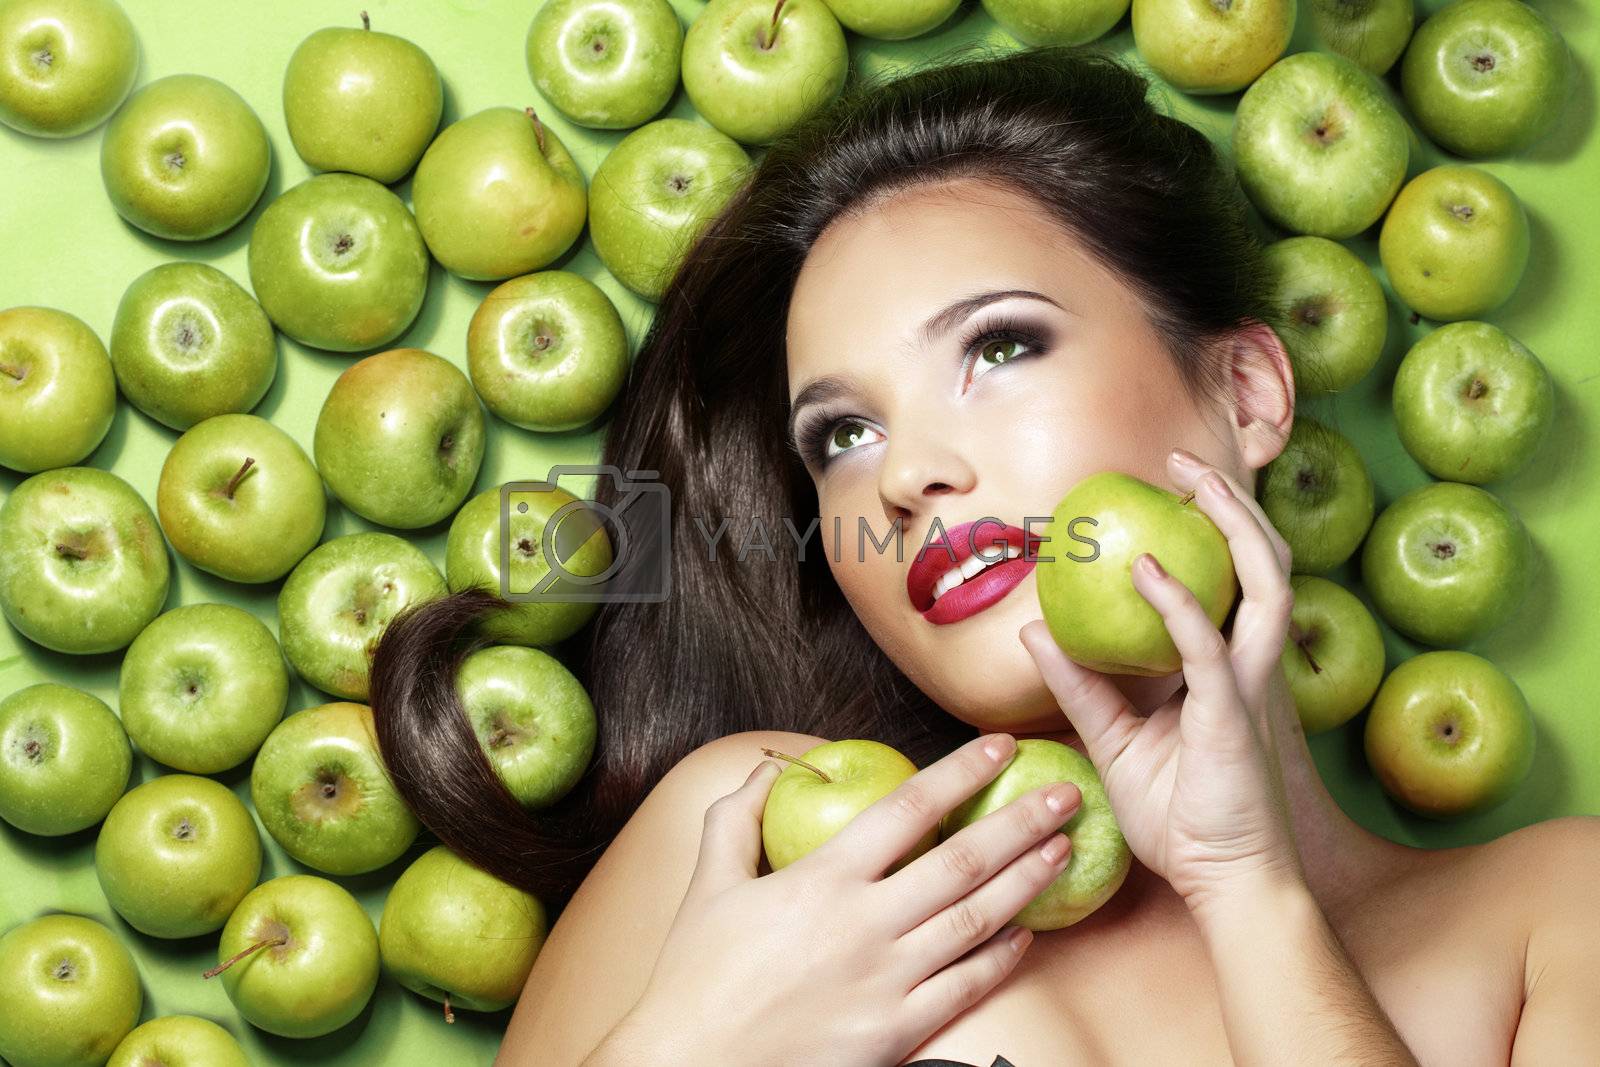 Portrait of young beautiful woman with apples